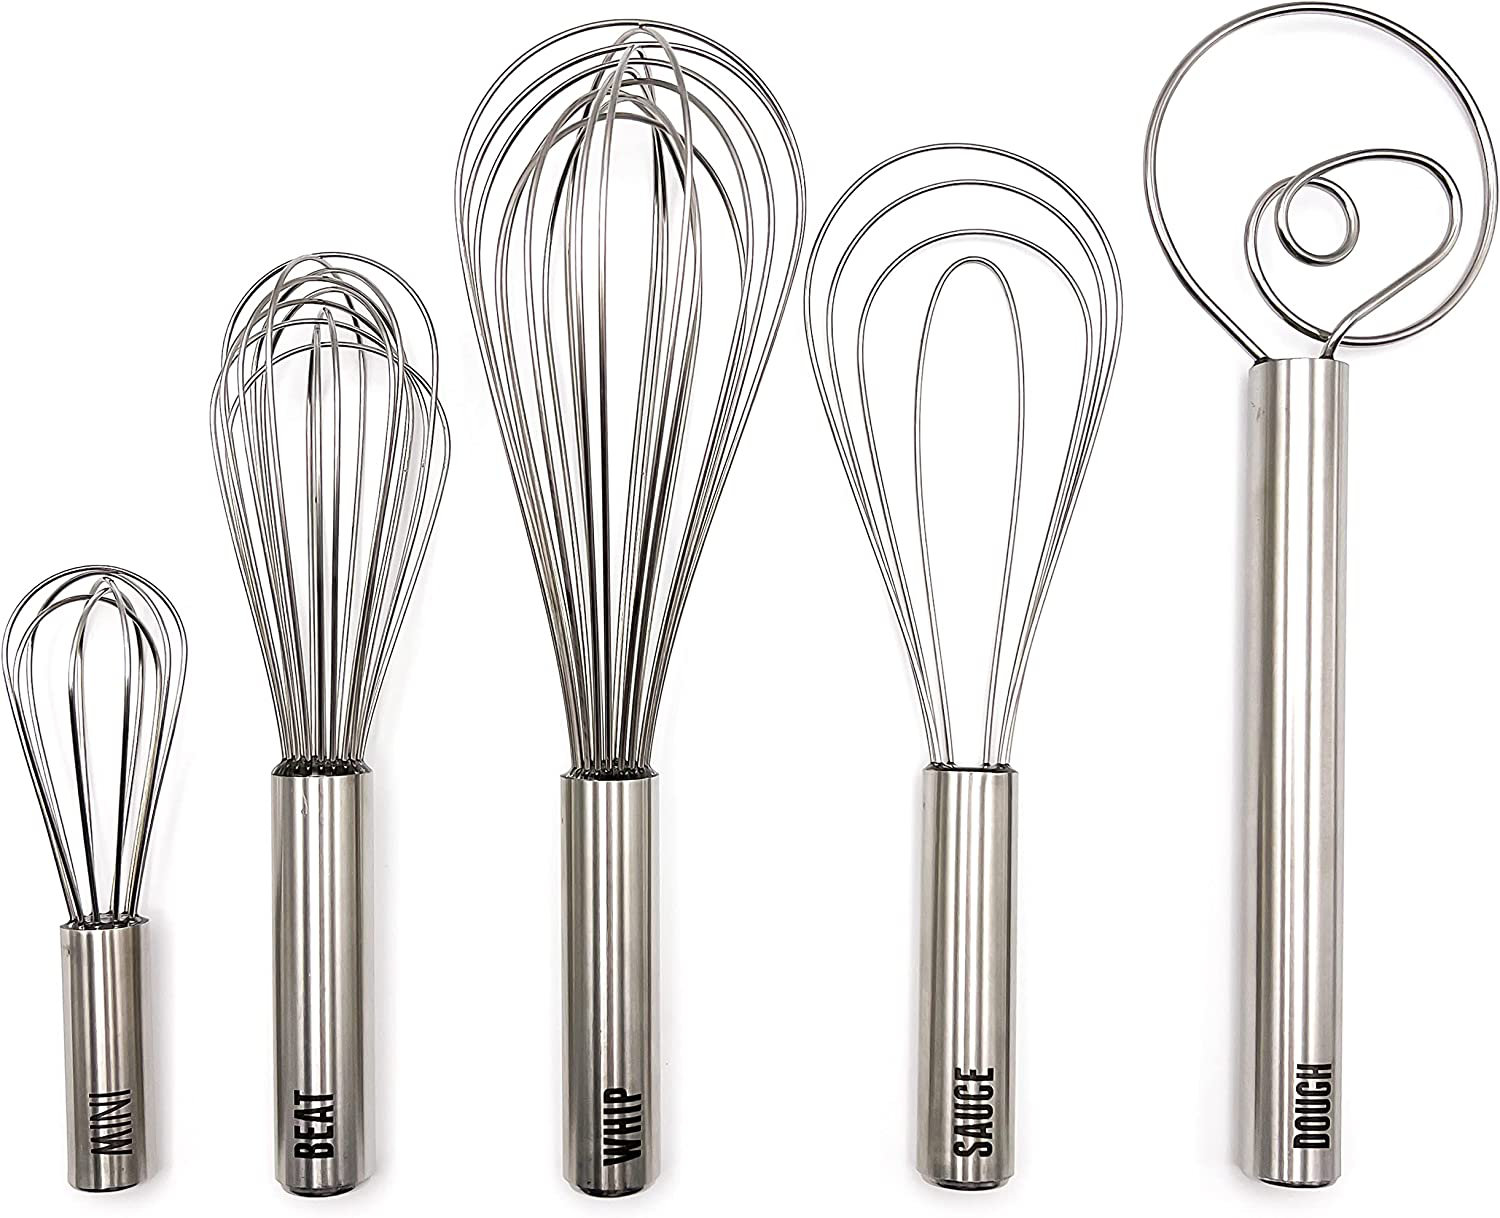 Tovolo, 11 Whip Whisk, Silver